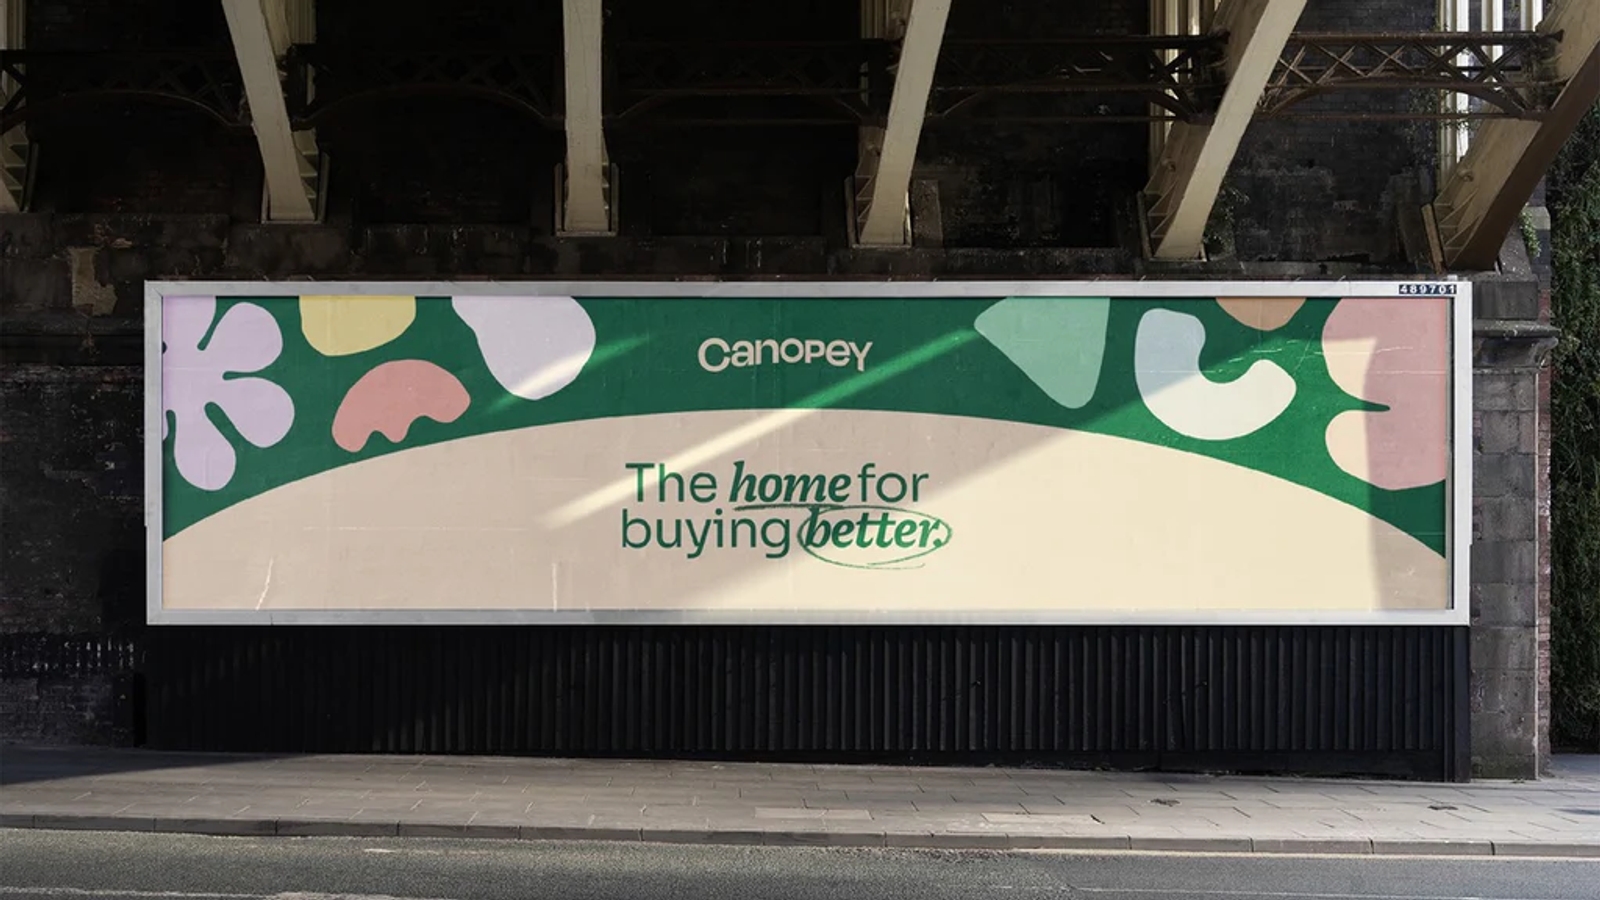 A billboard with the Canopey logo and the words 'The home for buying better'